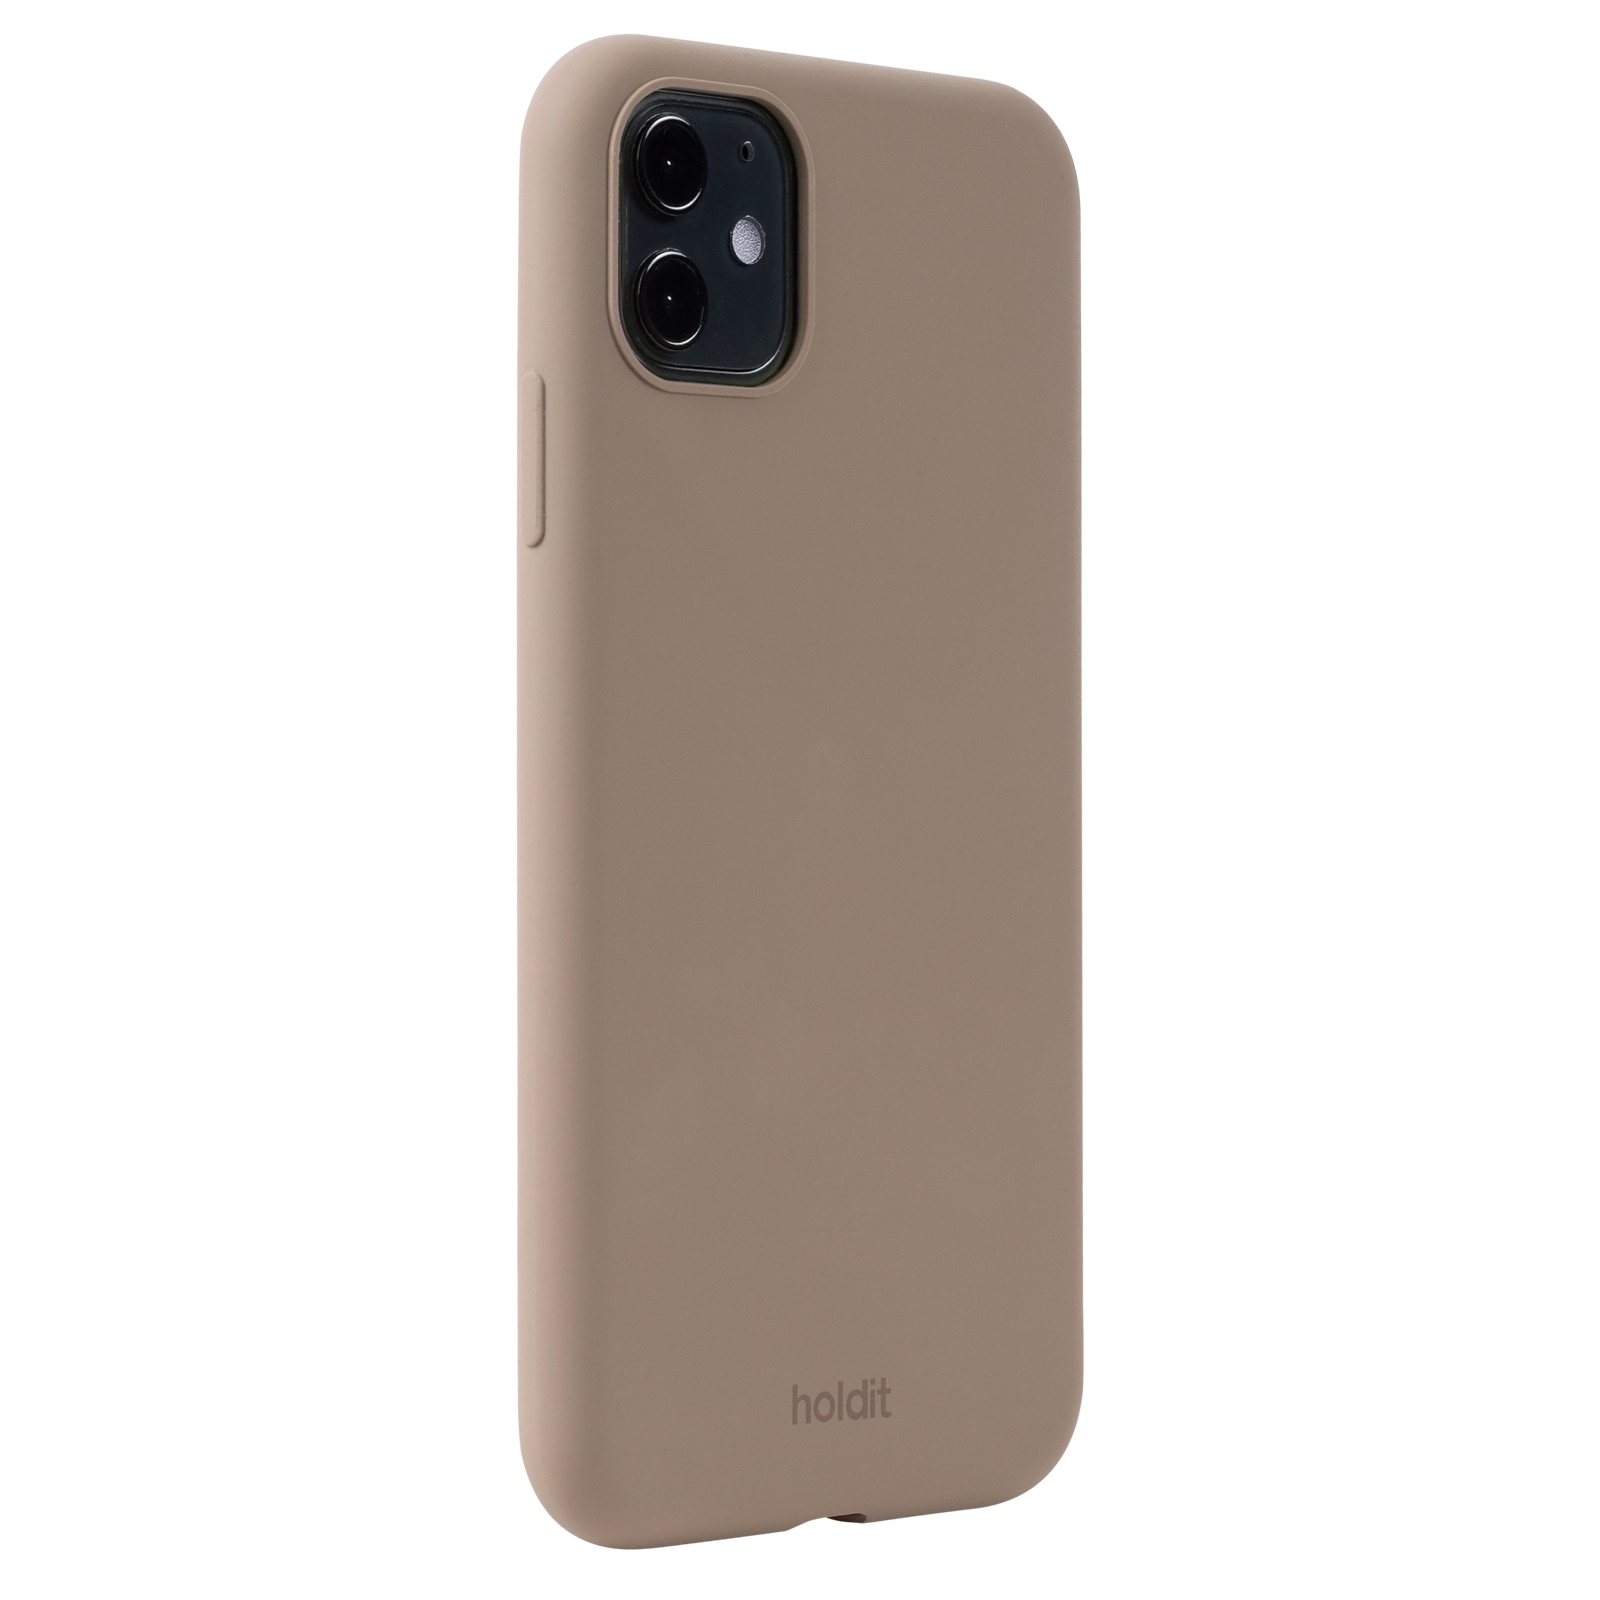 iPhone XR Silicone Case Mocha Brown